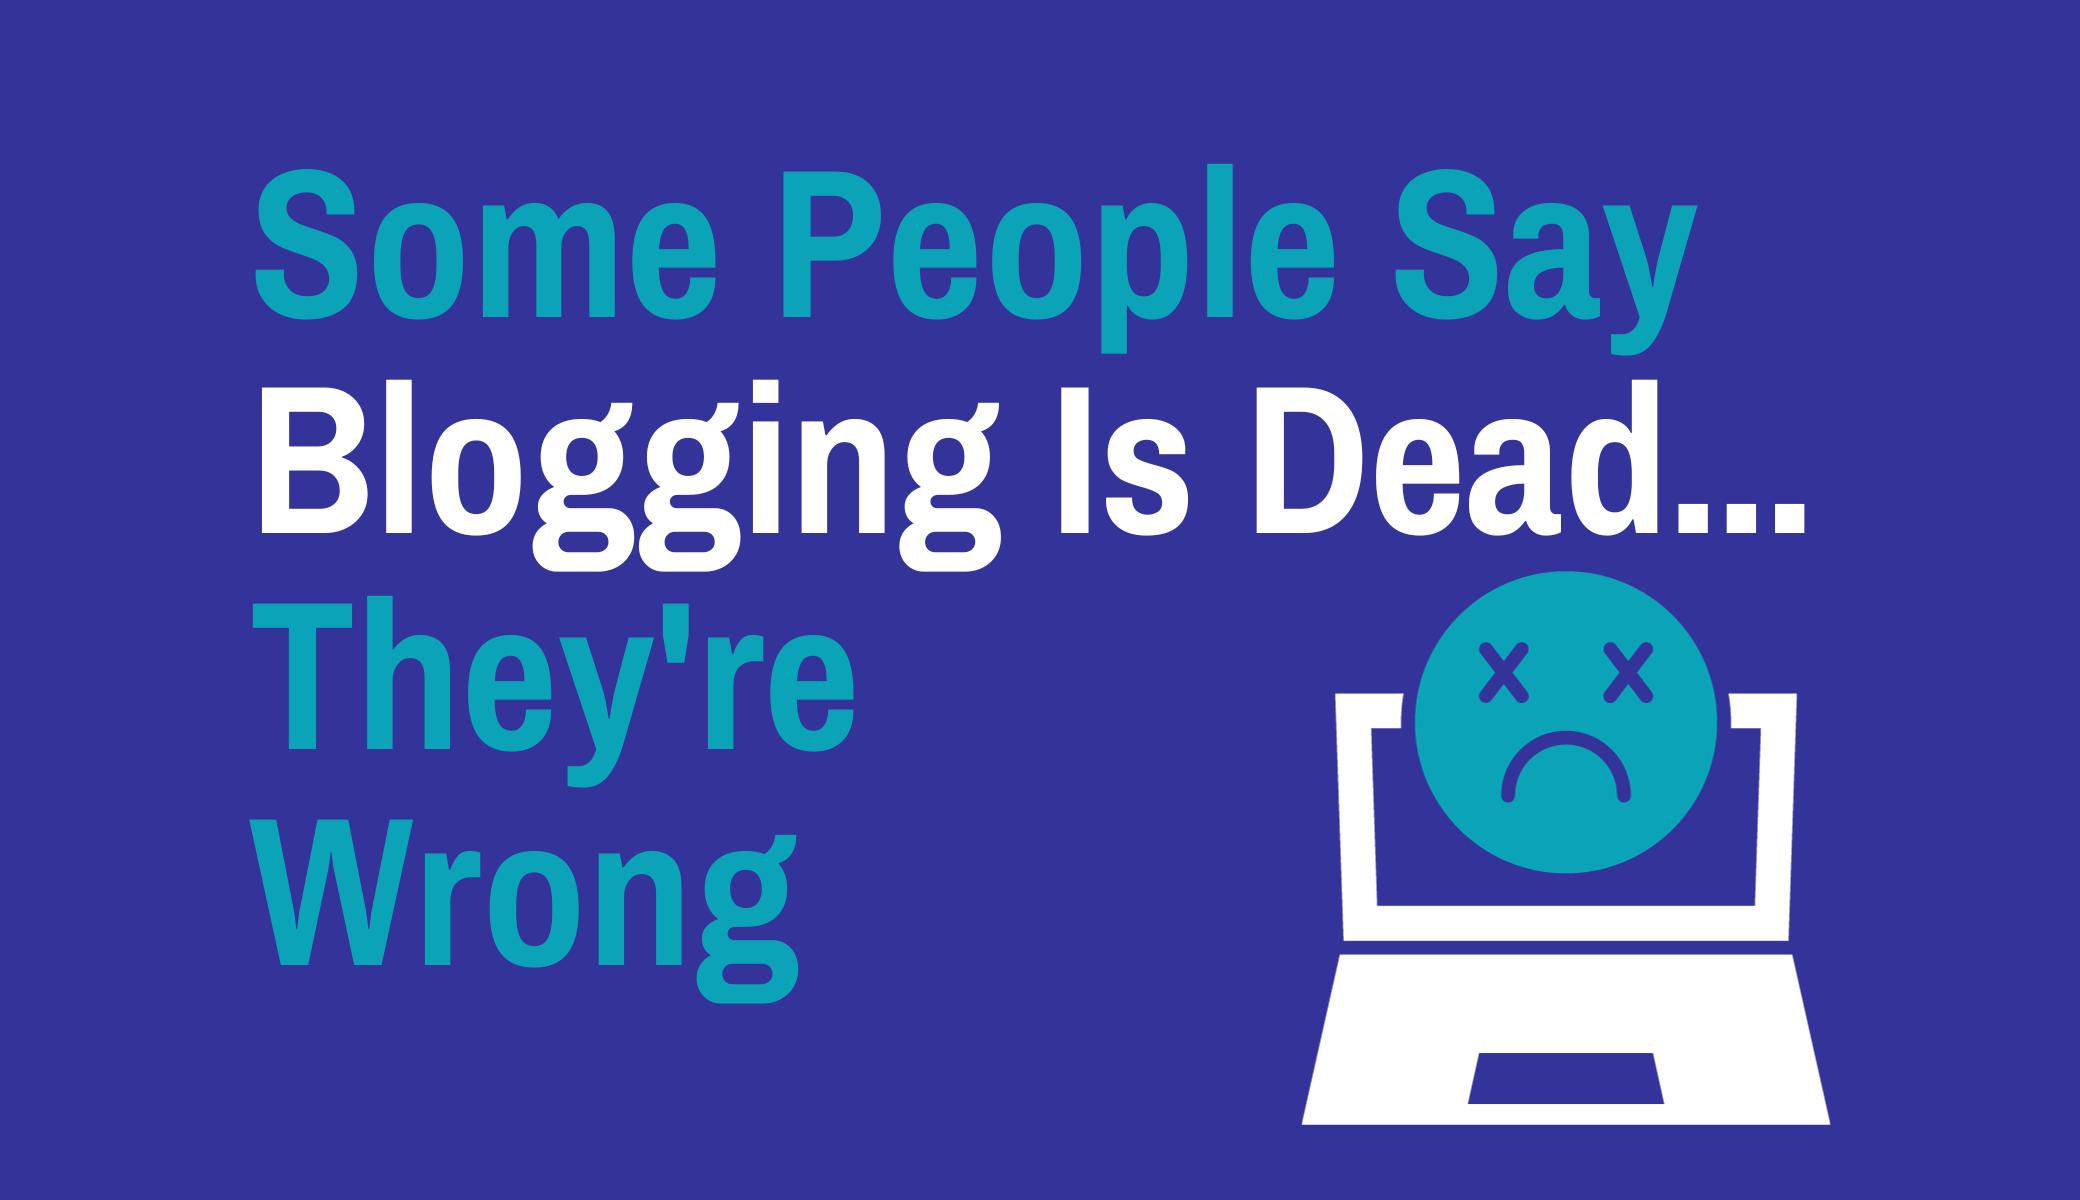 Some People Say Blogging Is Dead... They're Wrong